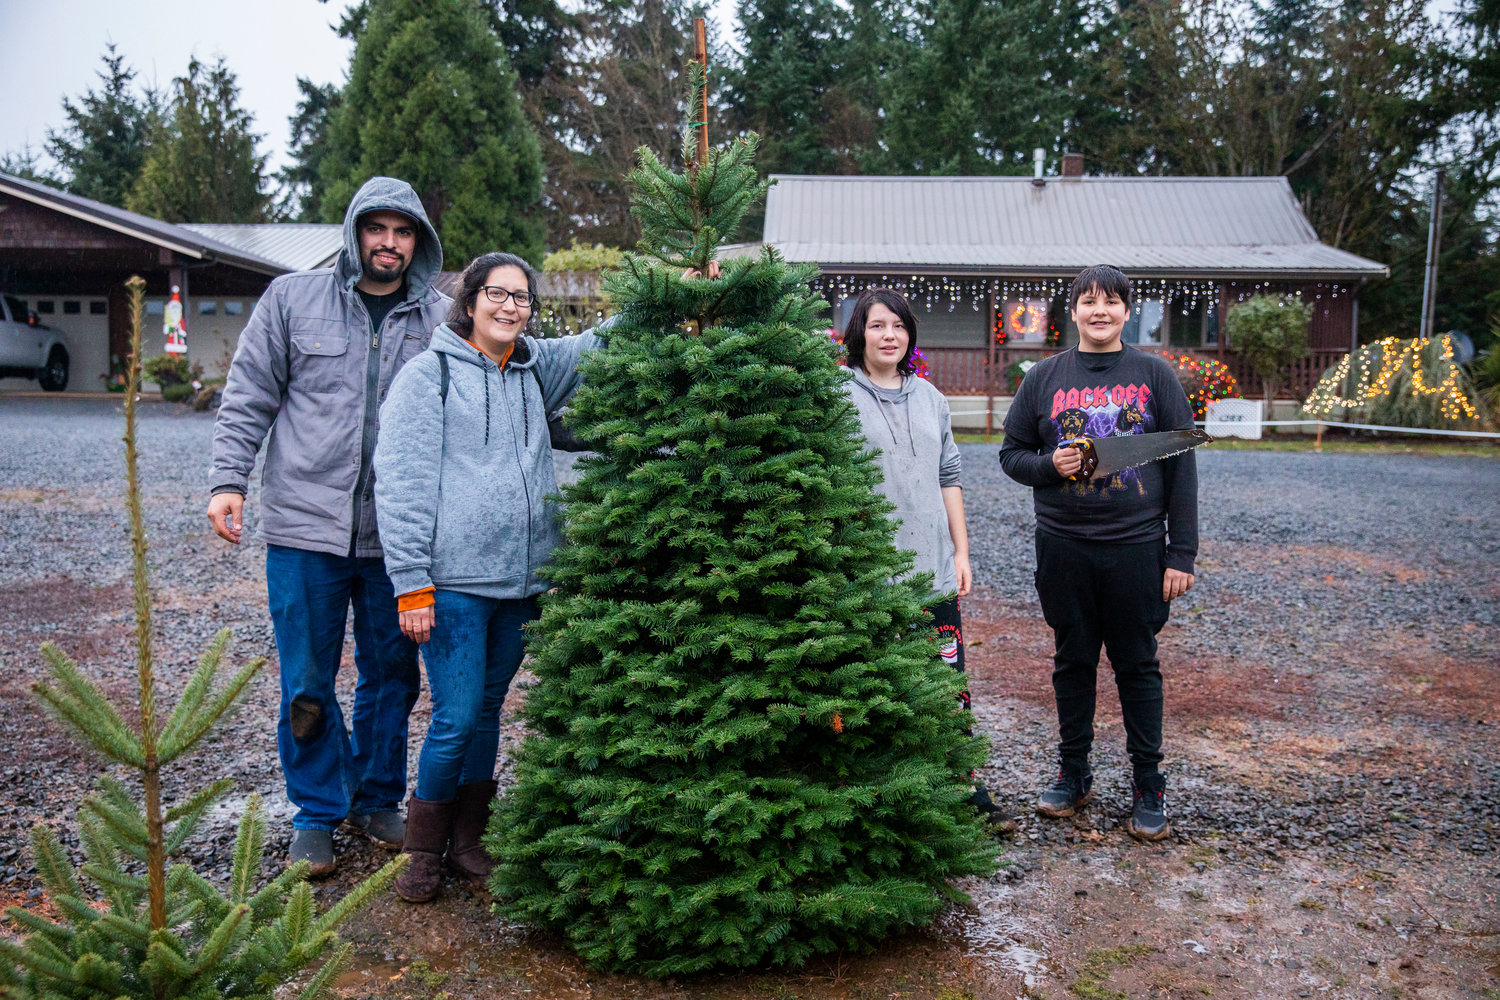 From left, Tyler Nunez, Winona Gladue, Lily, 13, and Michael Gladue, 12, smile for a photo after finding a tree at the Mistletoe Tree Farm west of Chehalis on Friday.